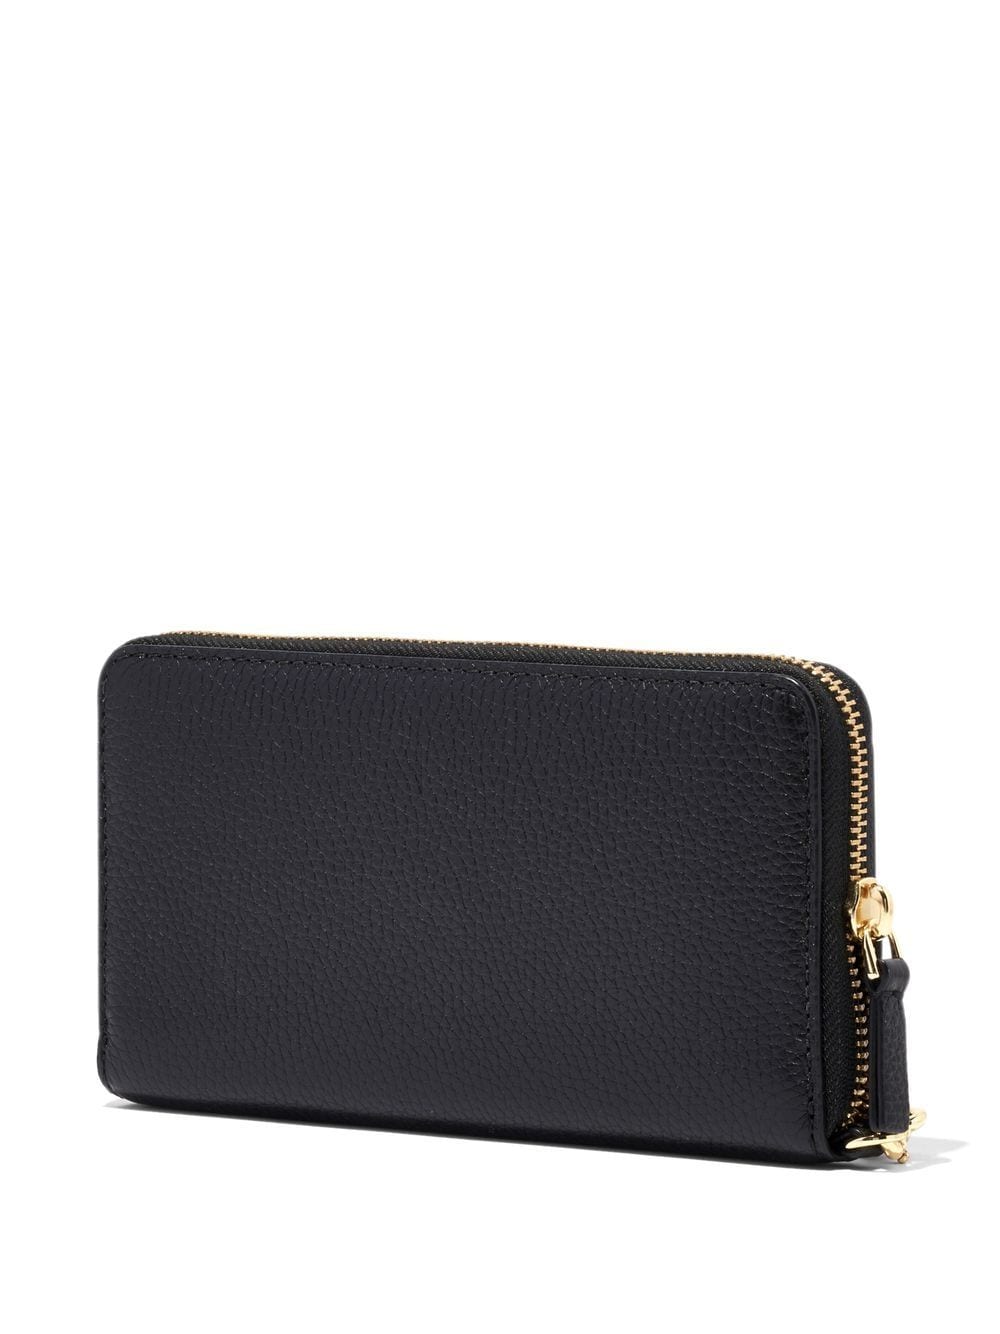 Marc Jacobs The Continental Leather Wallet In Black | ModeSens